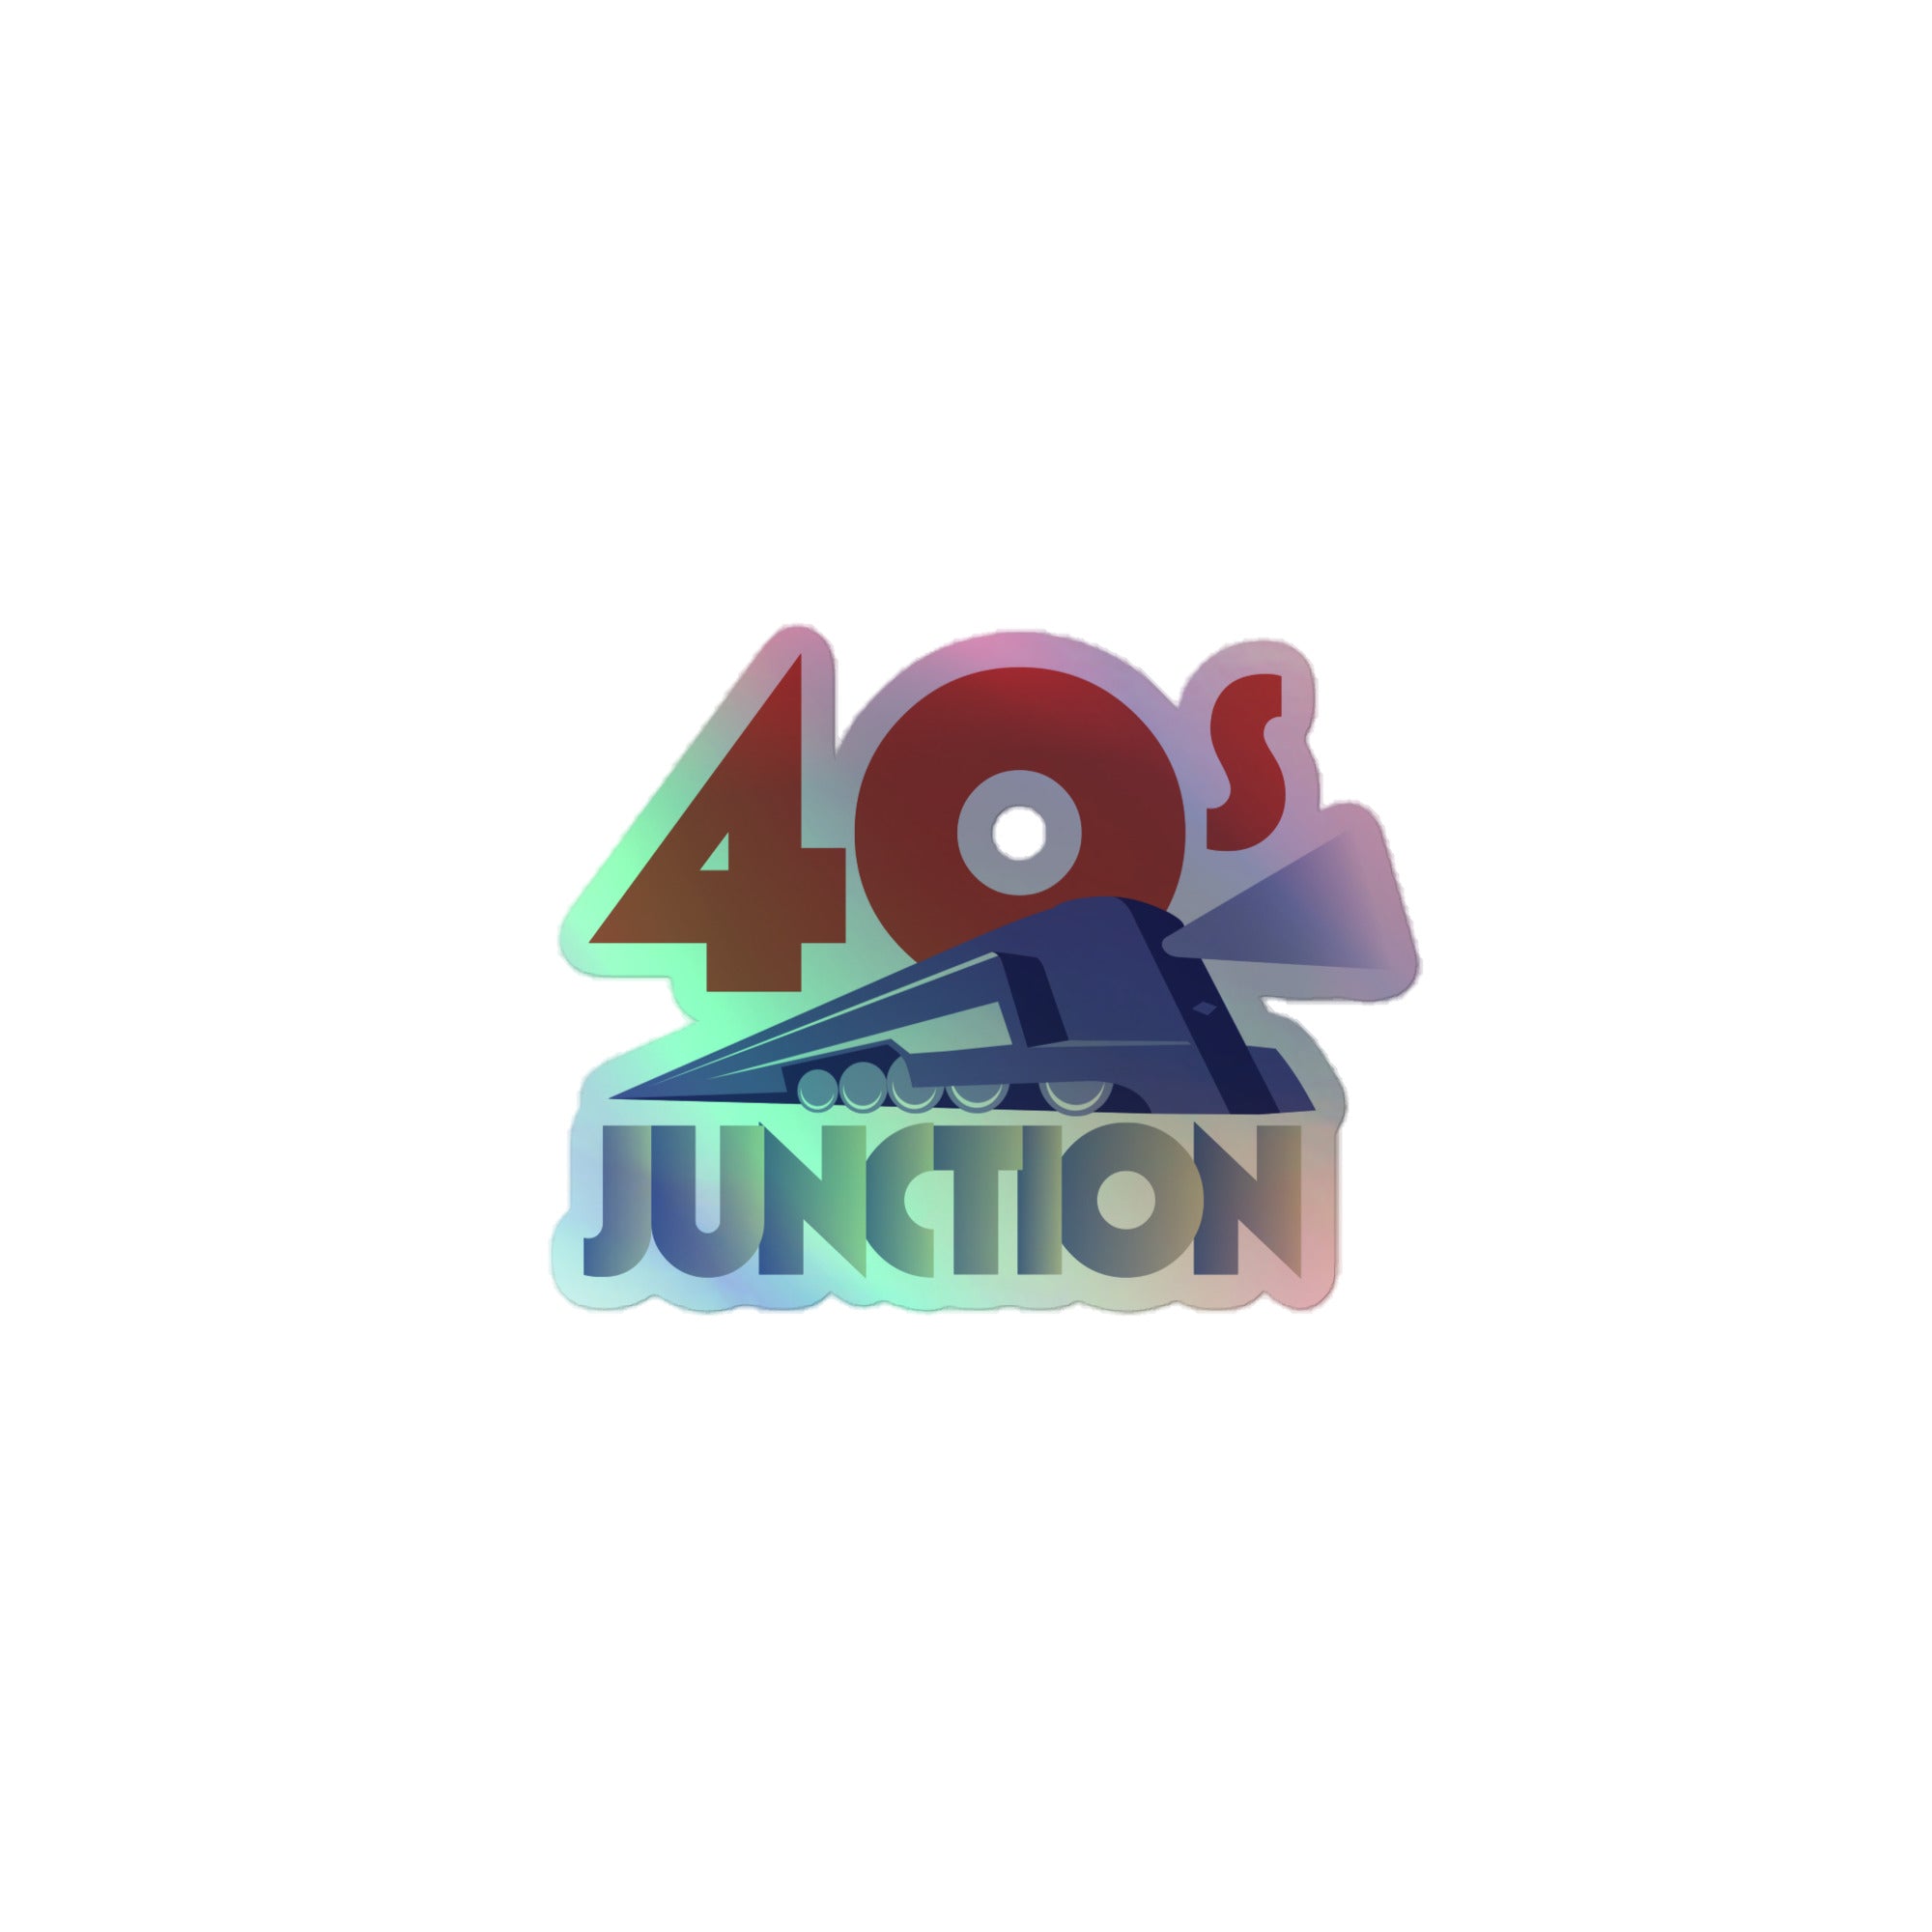 40s Junction: Holographic Sticker